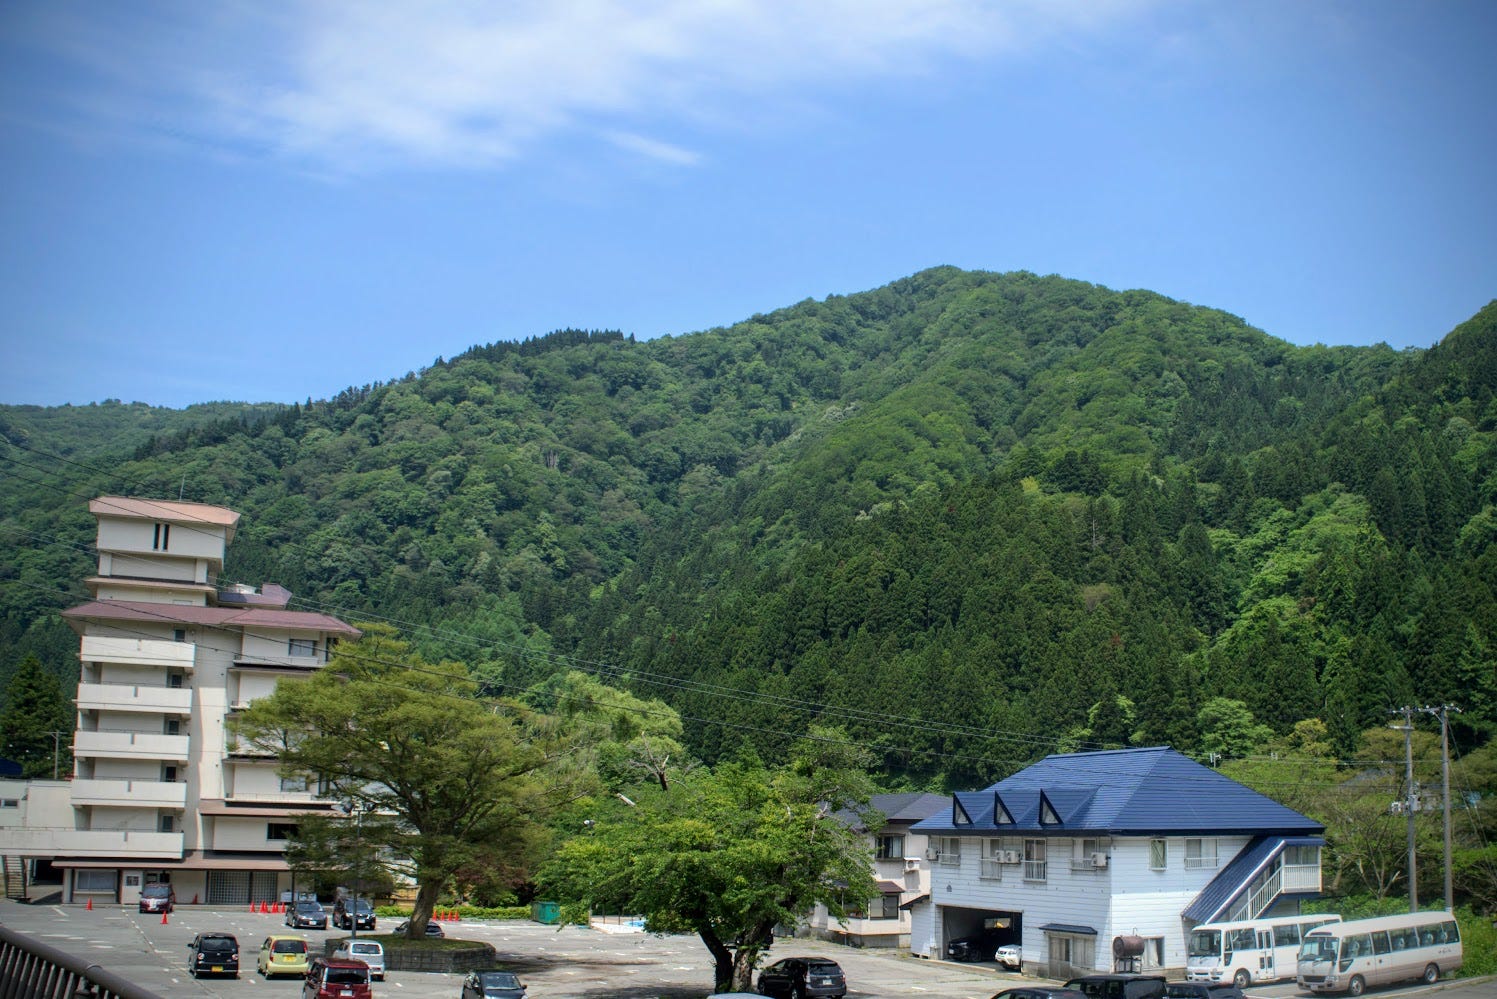 Two Ryokan (hotel) buildings in Semi Onsen in the foreground with the forested Kamewari-yama in the background.